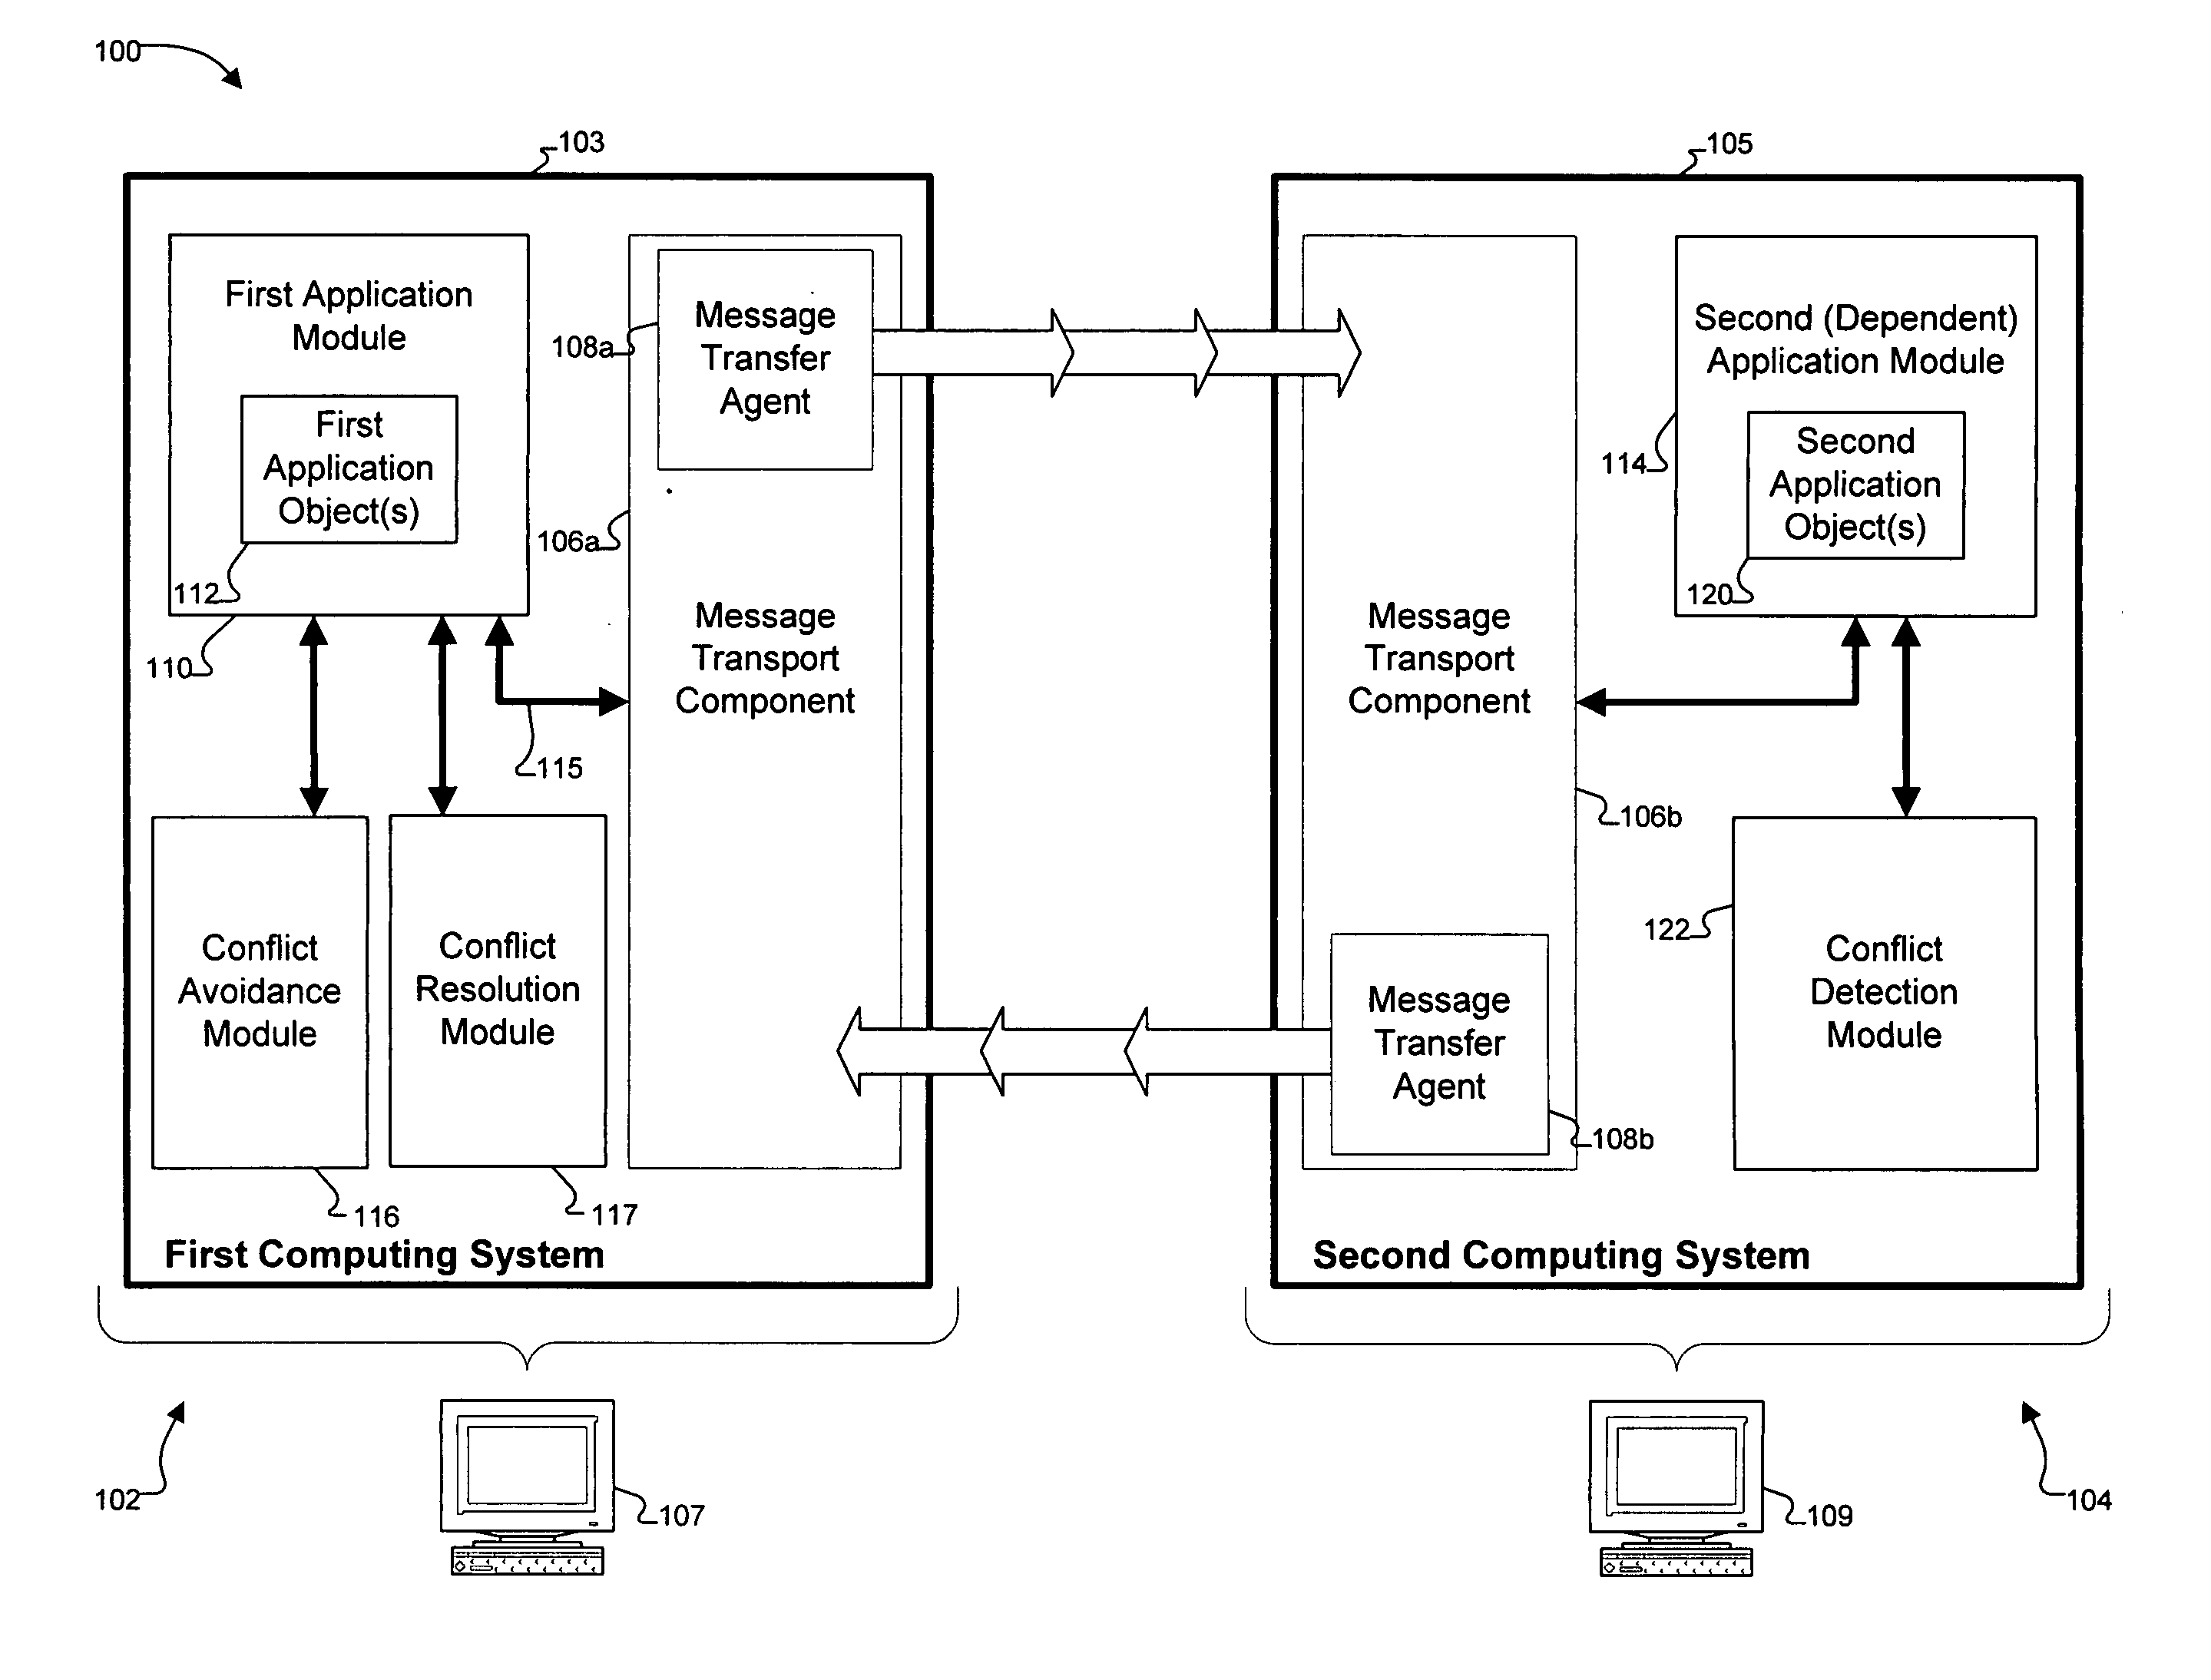 Conflict avoidance and resolution in a distributed computing system